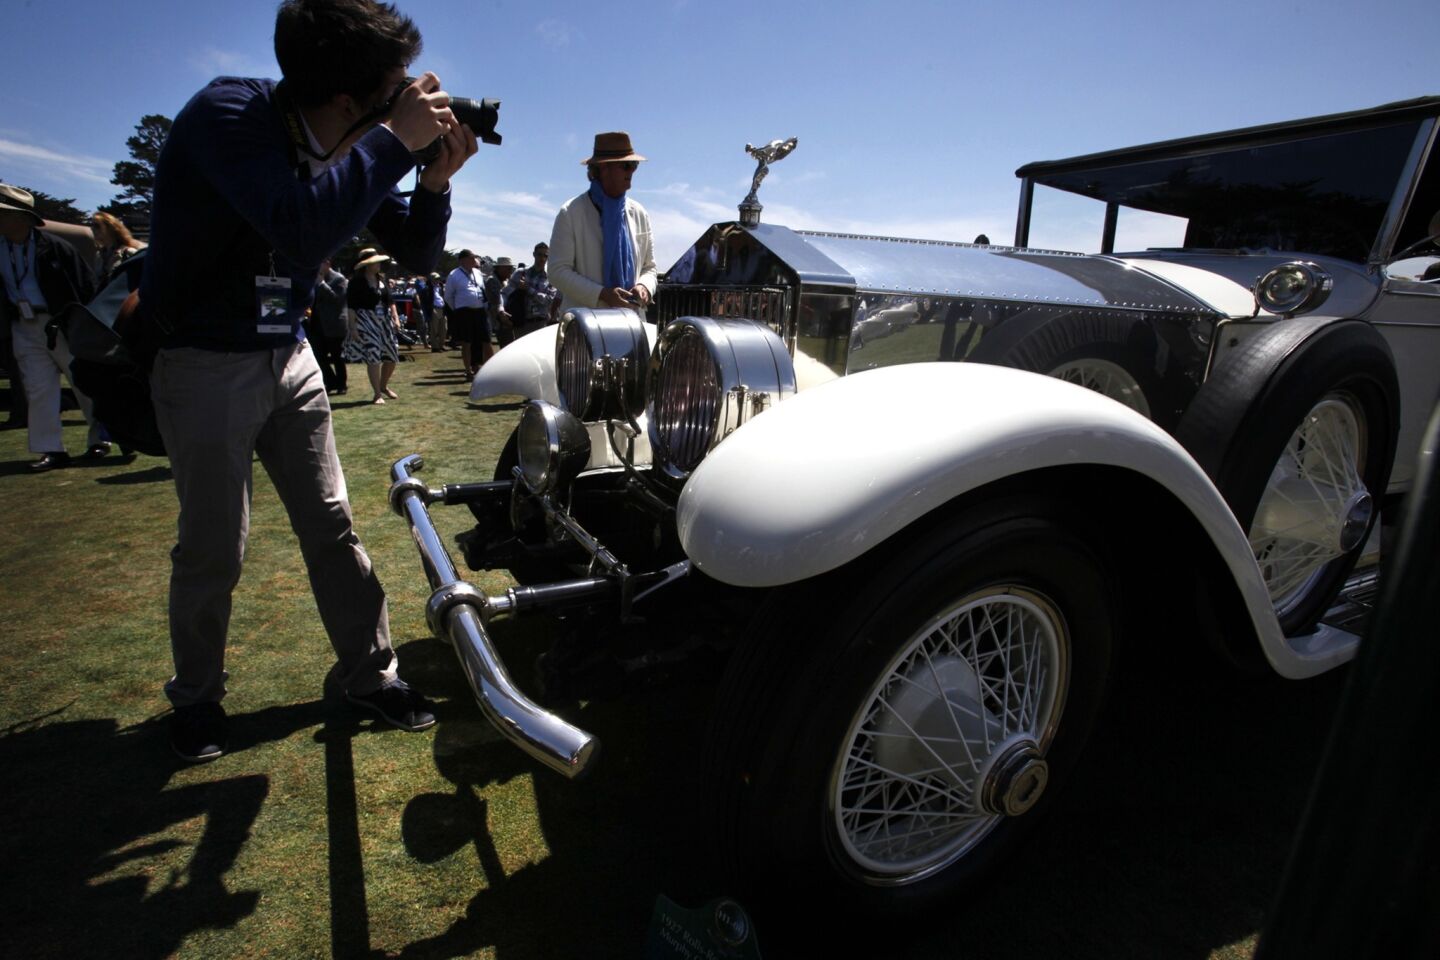 The 2013 Concours d'Elegance